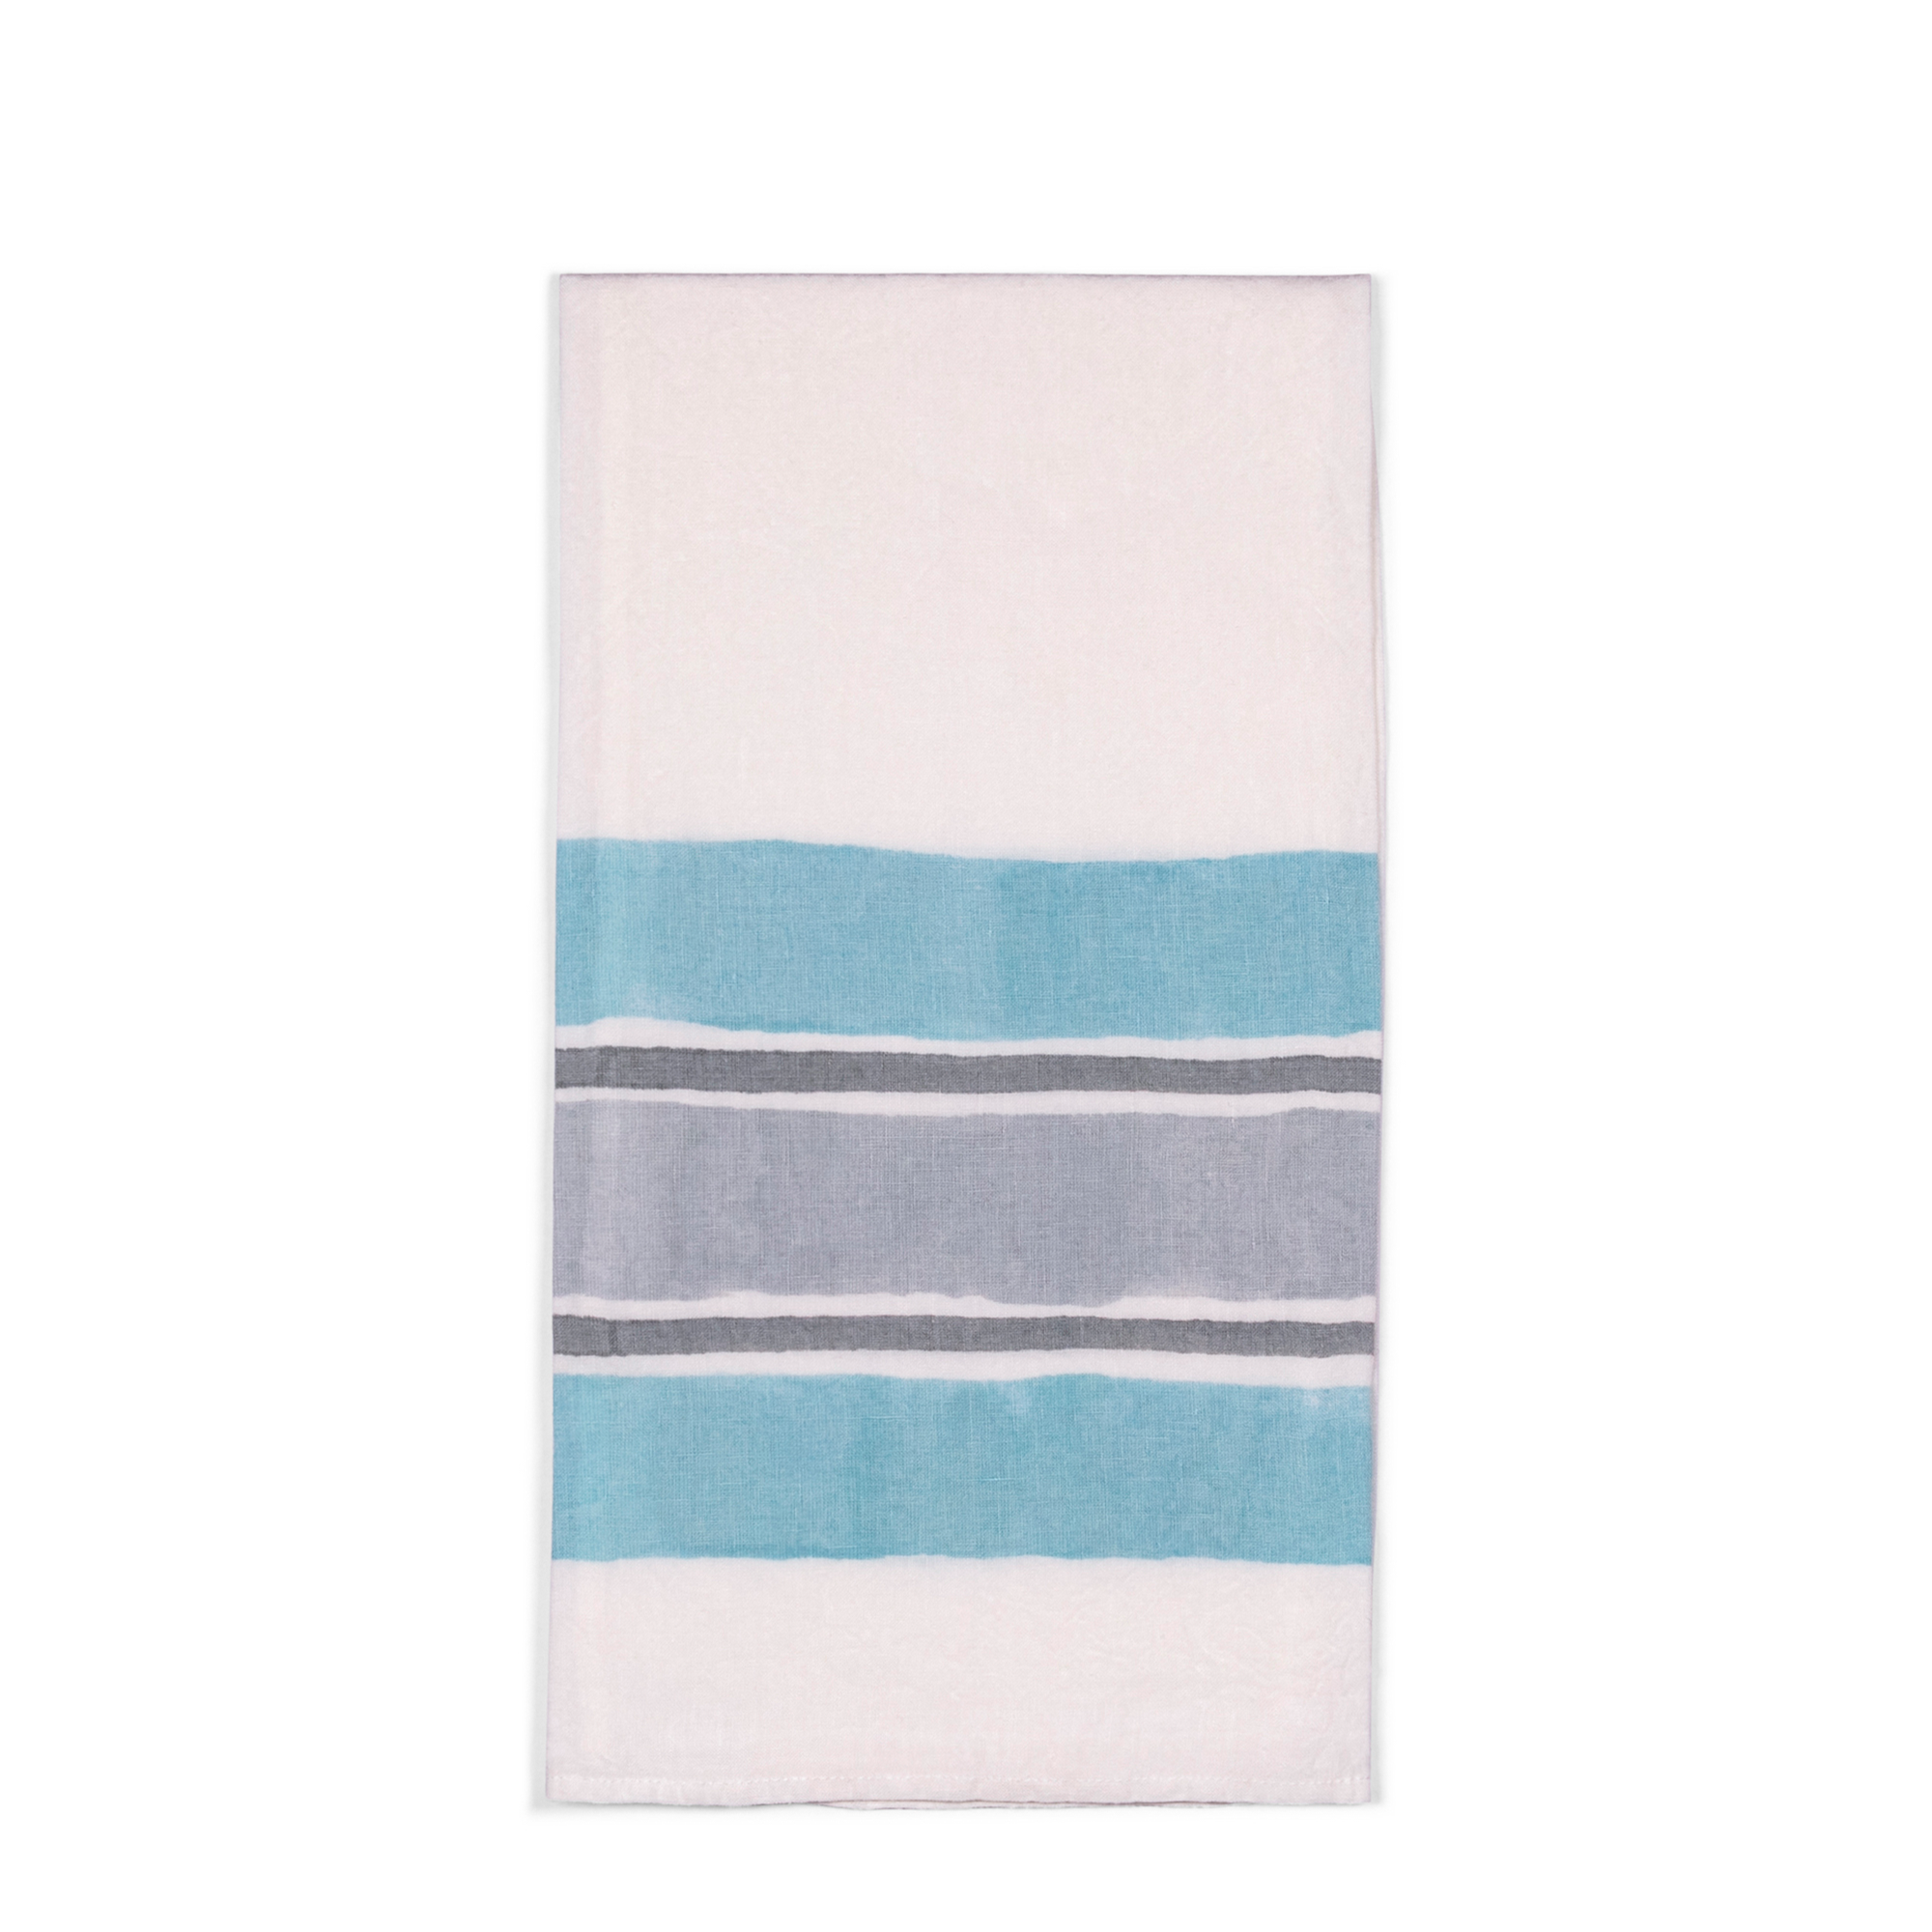 A 100% linen white tea towel, with light blue and grey stripes, handmade of pear wood. Perfect for breakfast, formal dining, a garden tablescape, or using in kitchen.